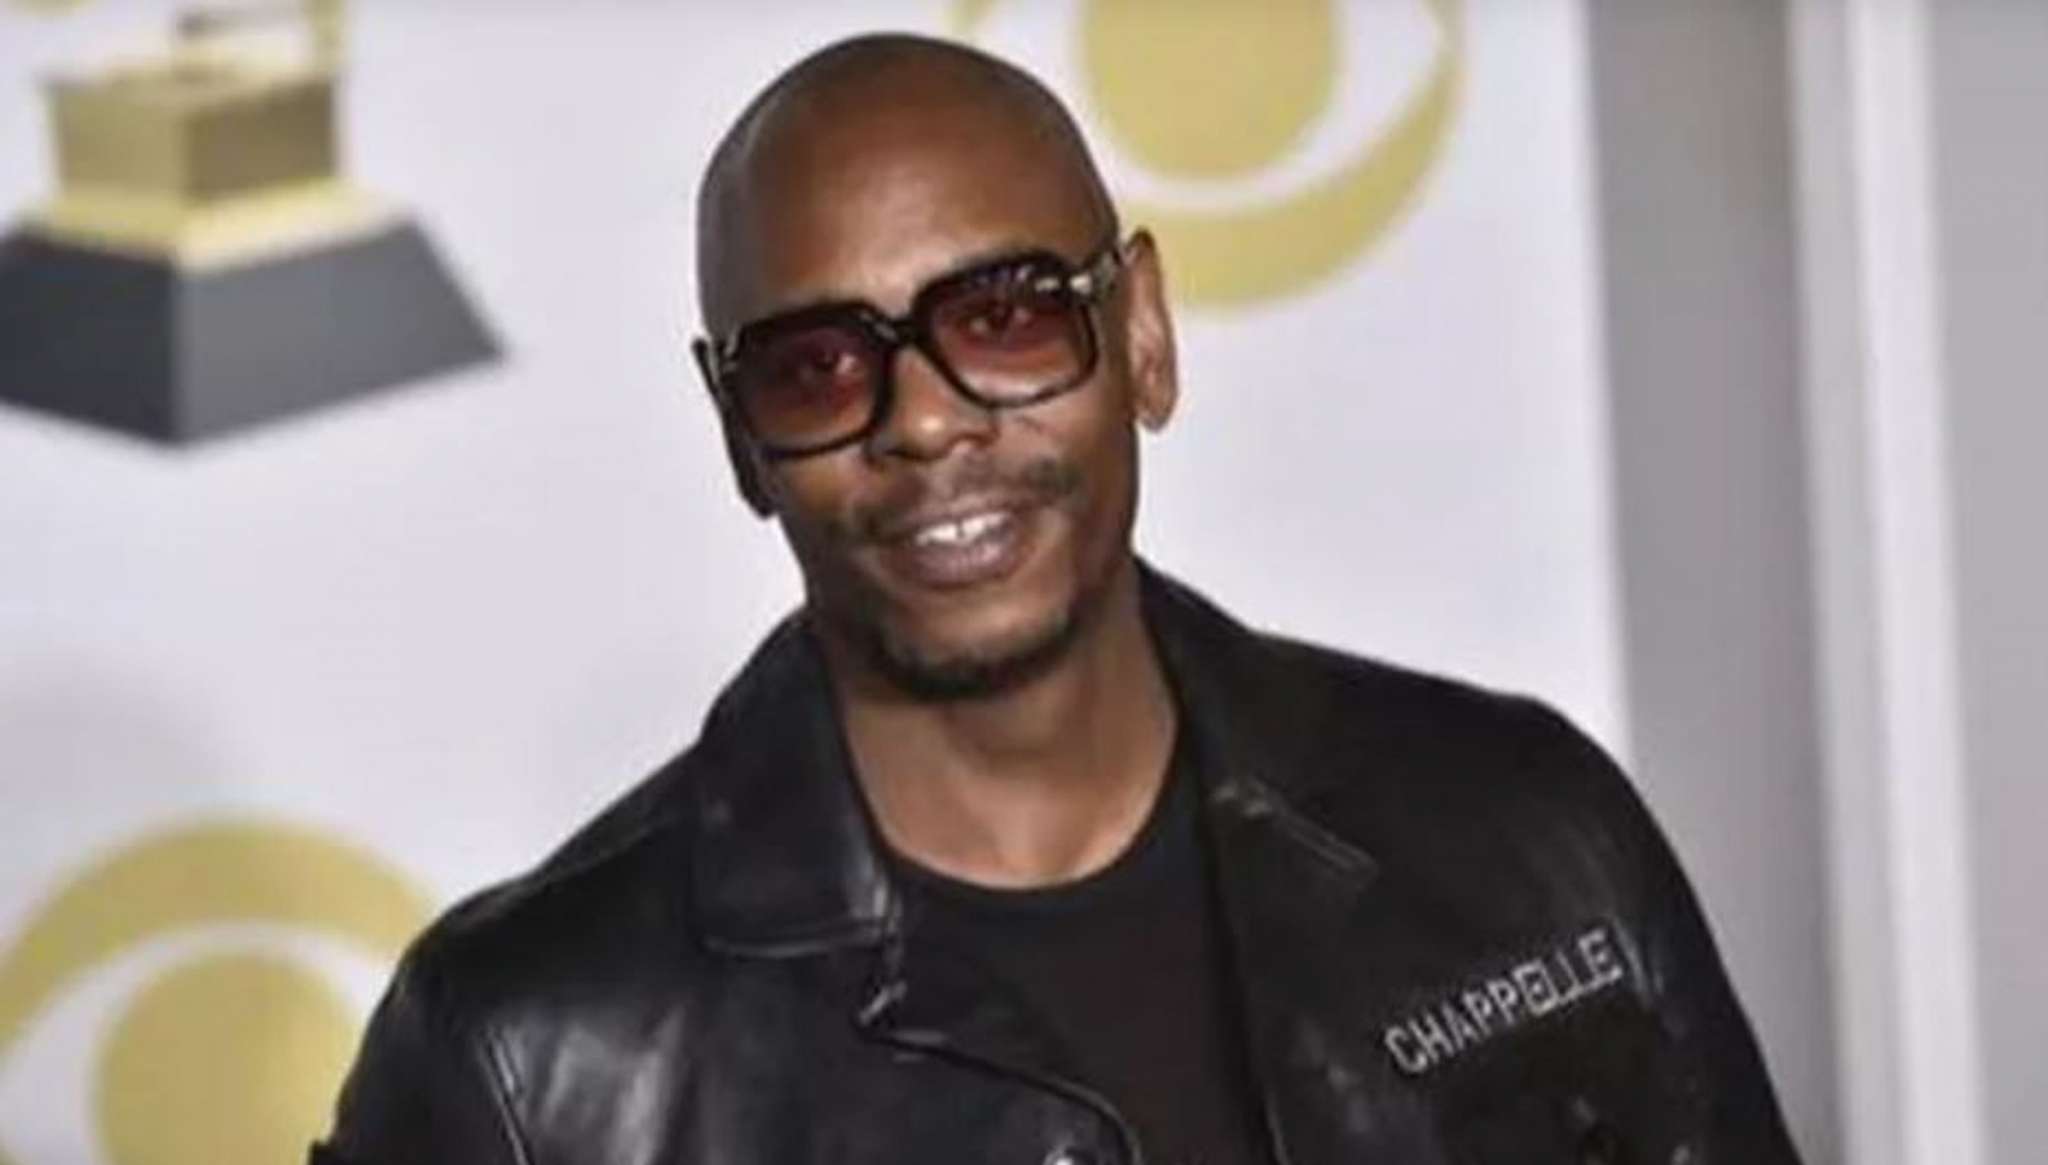 a-rapper-who-attacked-dave-chappelle-called-the-comedians-joke-the-reason-for-the-attack